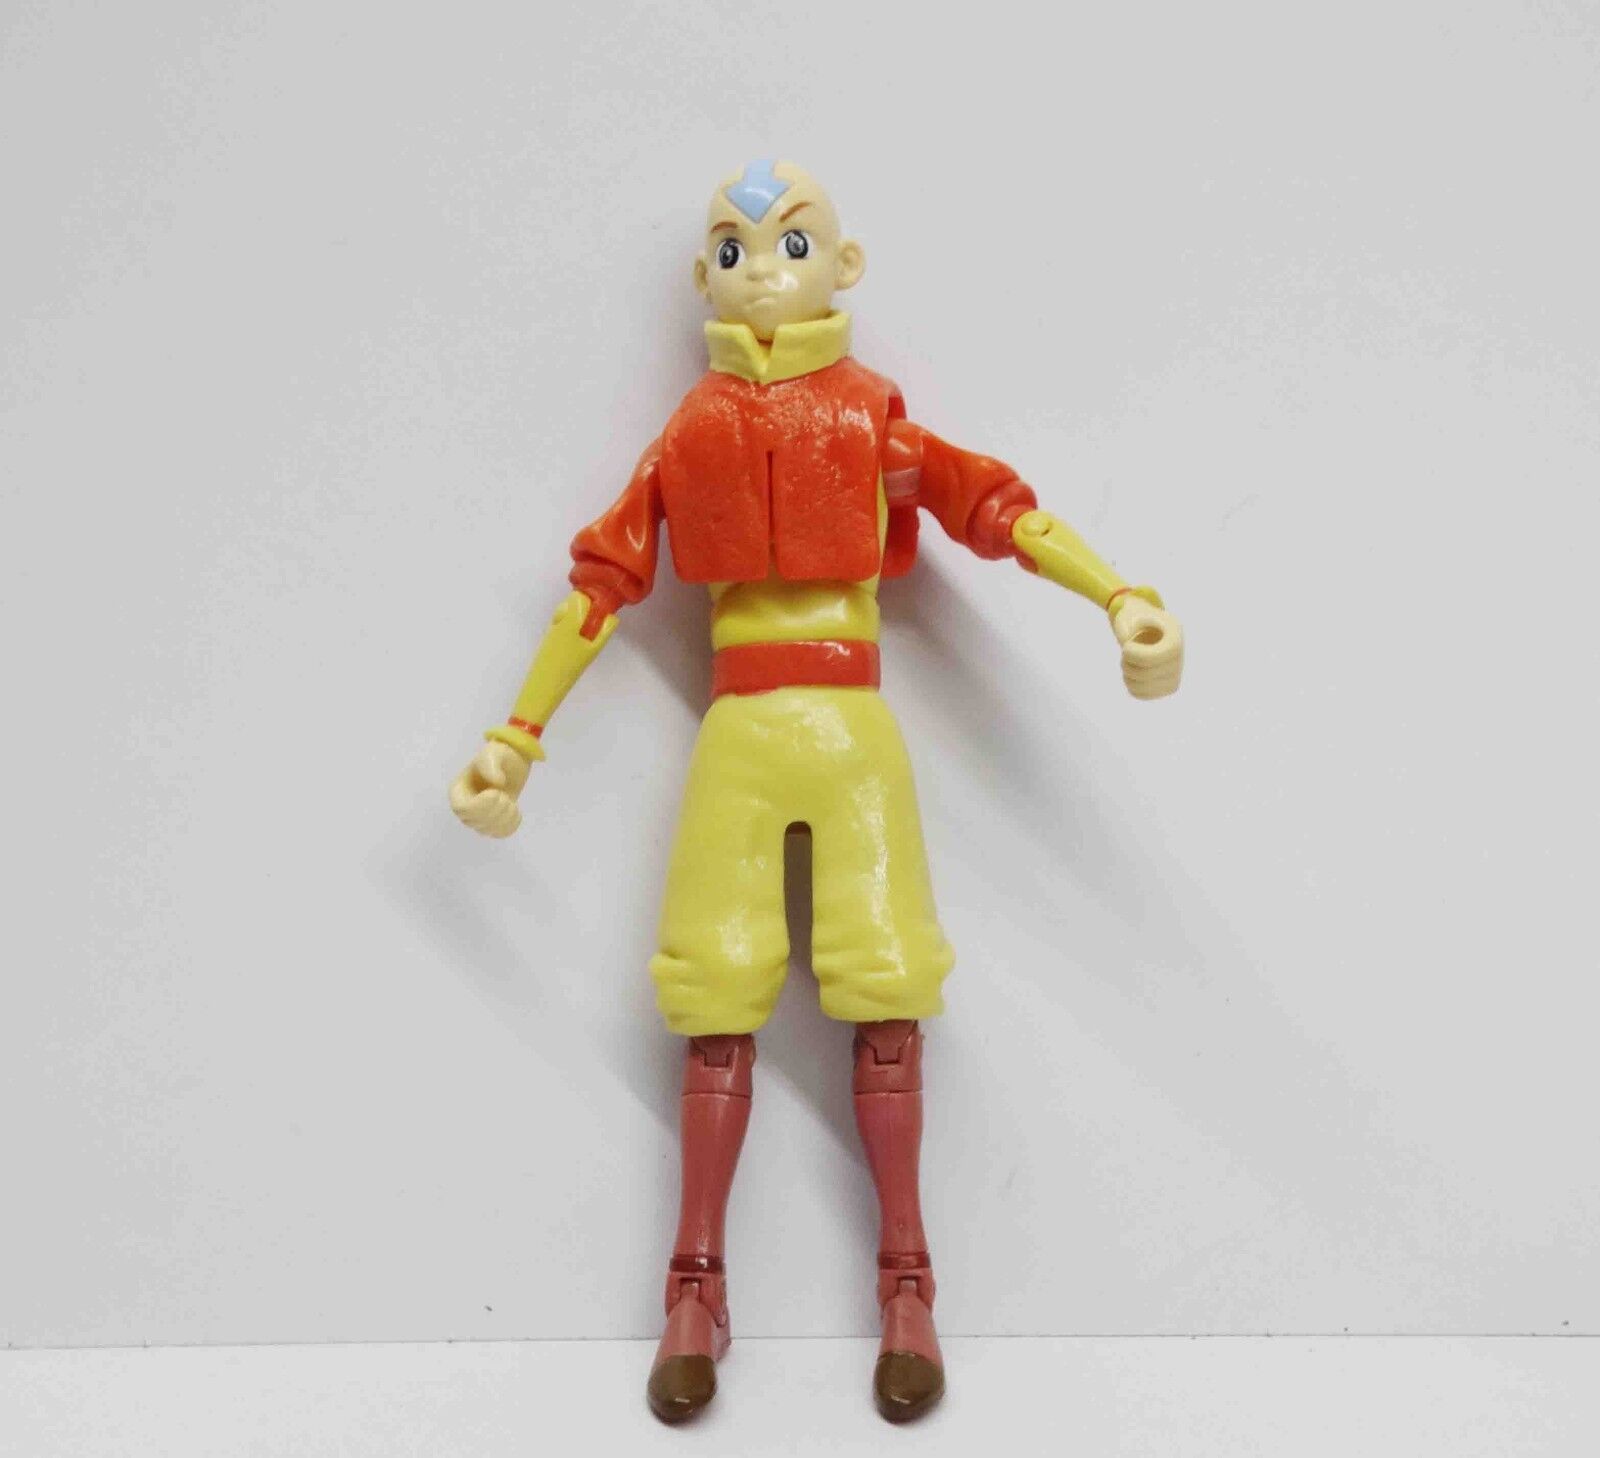 ::Avatar The Last Airbender  Aang action figure 5"